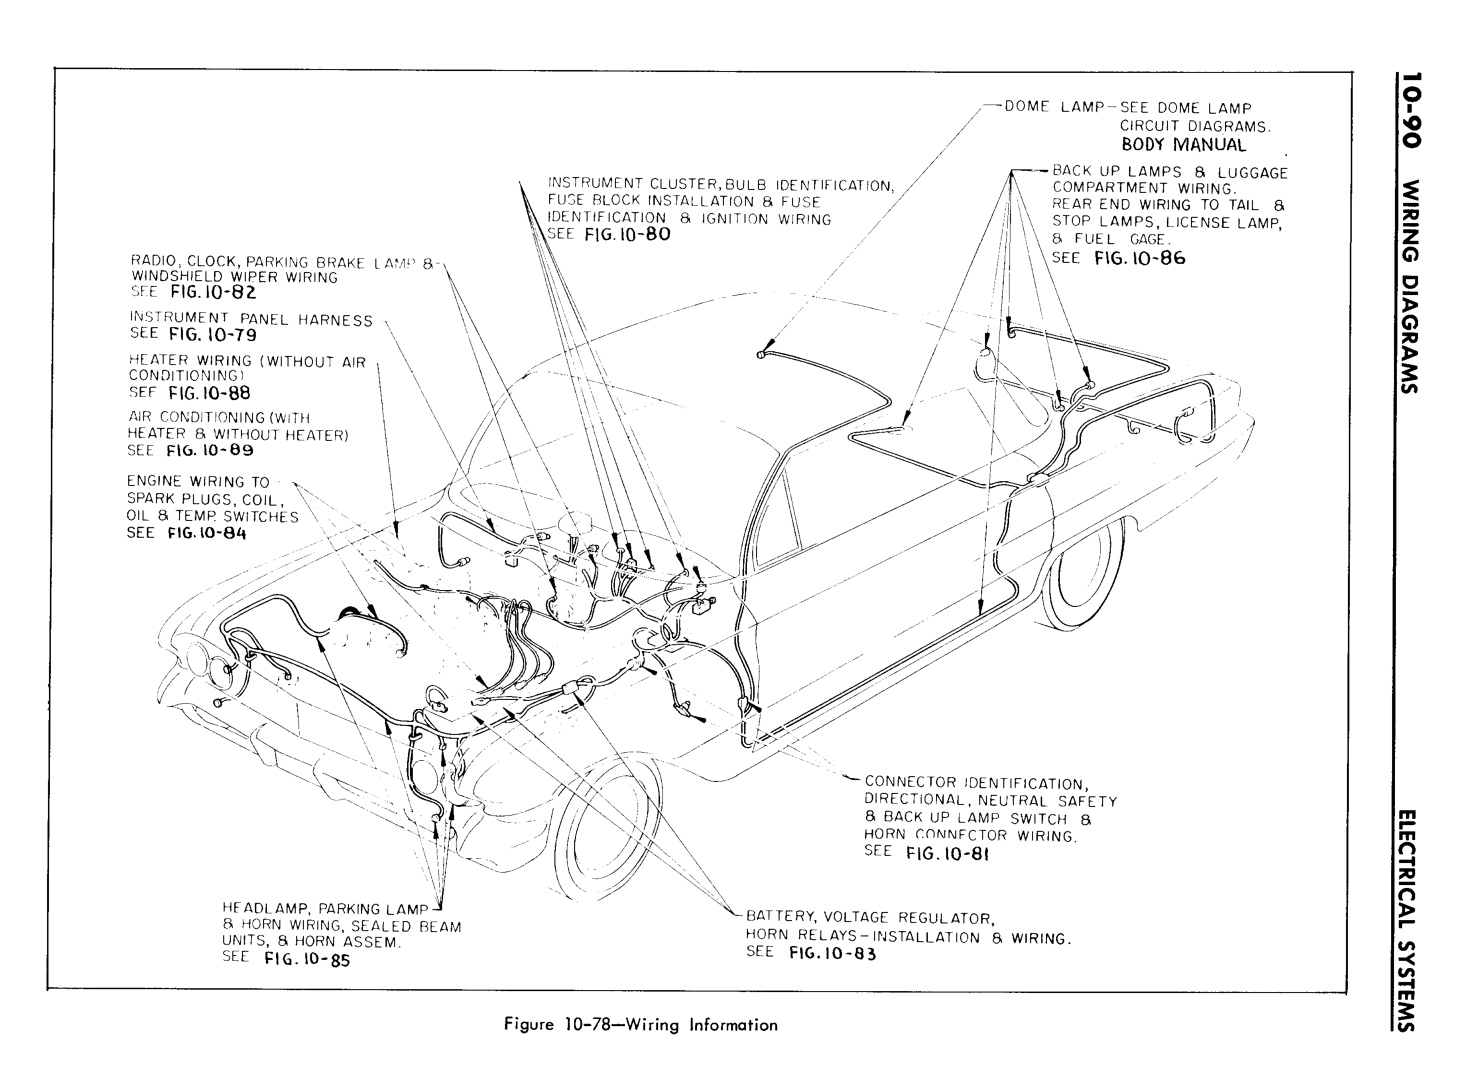 n_10 1961 Buick Shop Manual - Electrical Systems-090-090.jpg